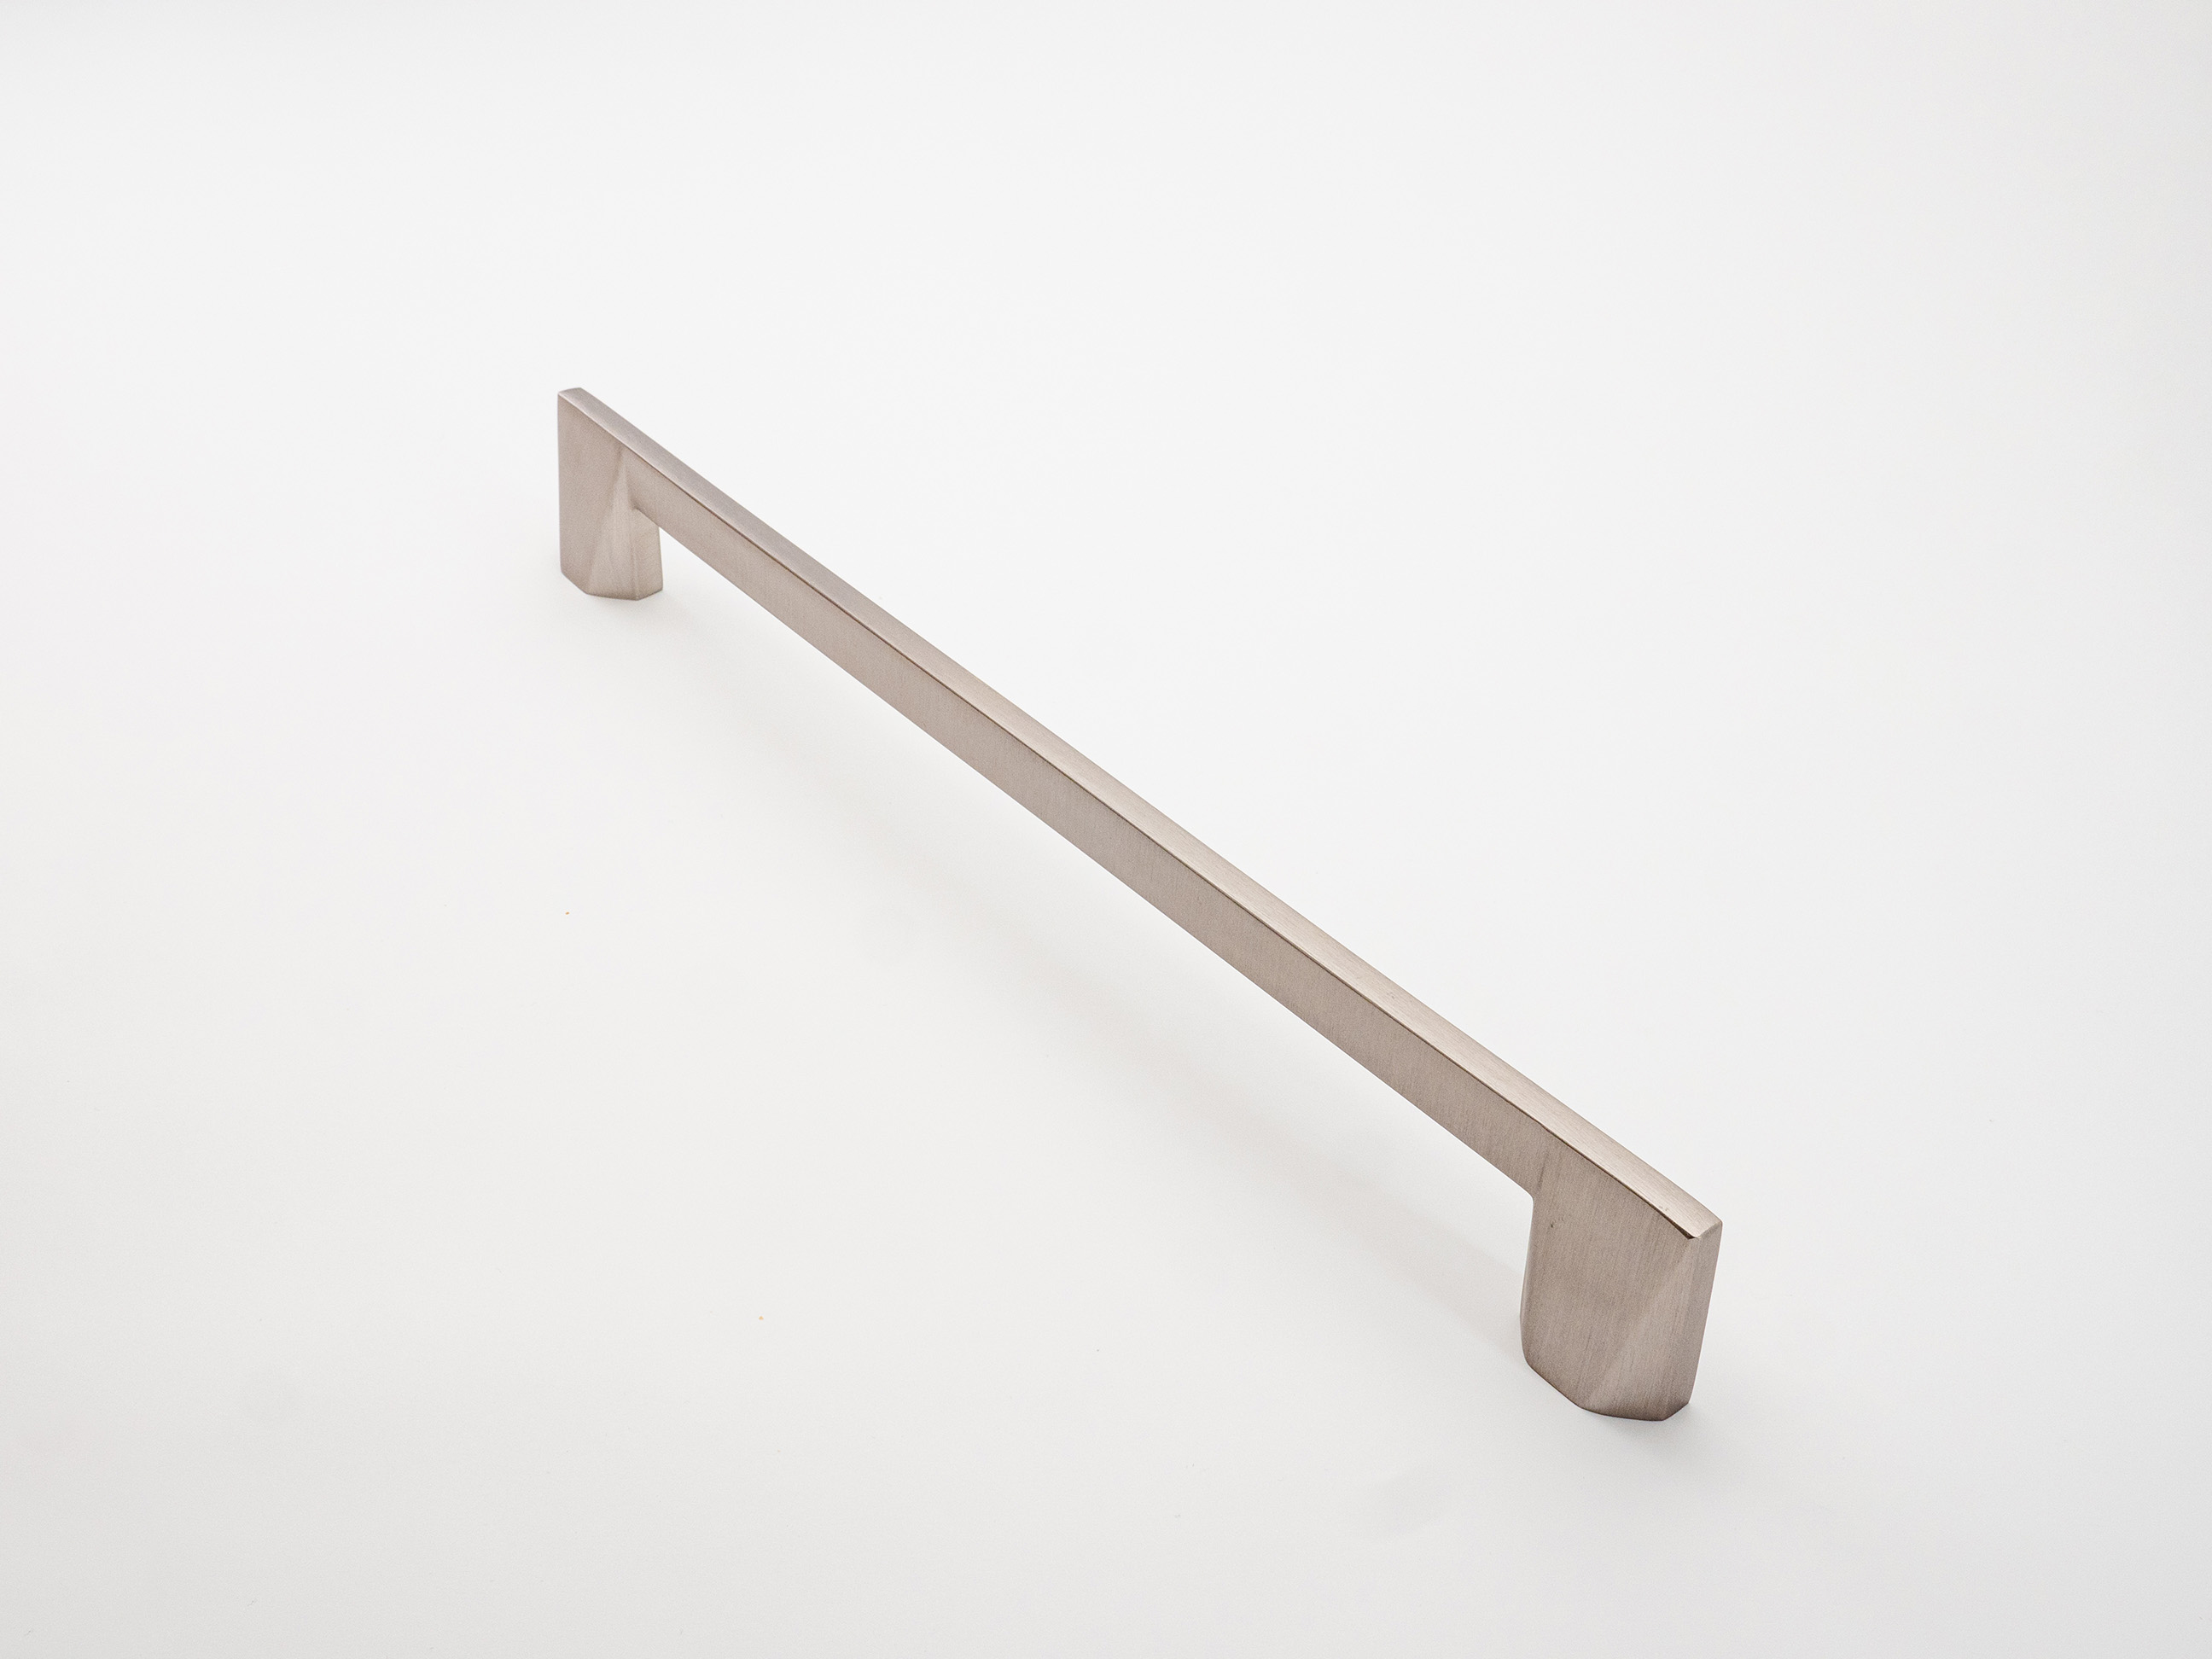 Extruded aluminium handle - Forged Brushed Anodized Stainless Steel